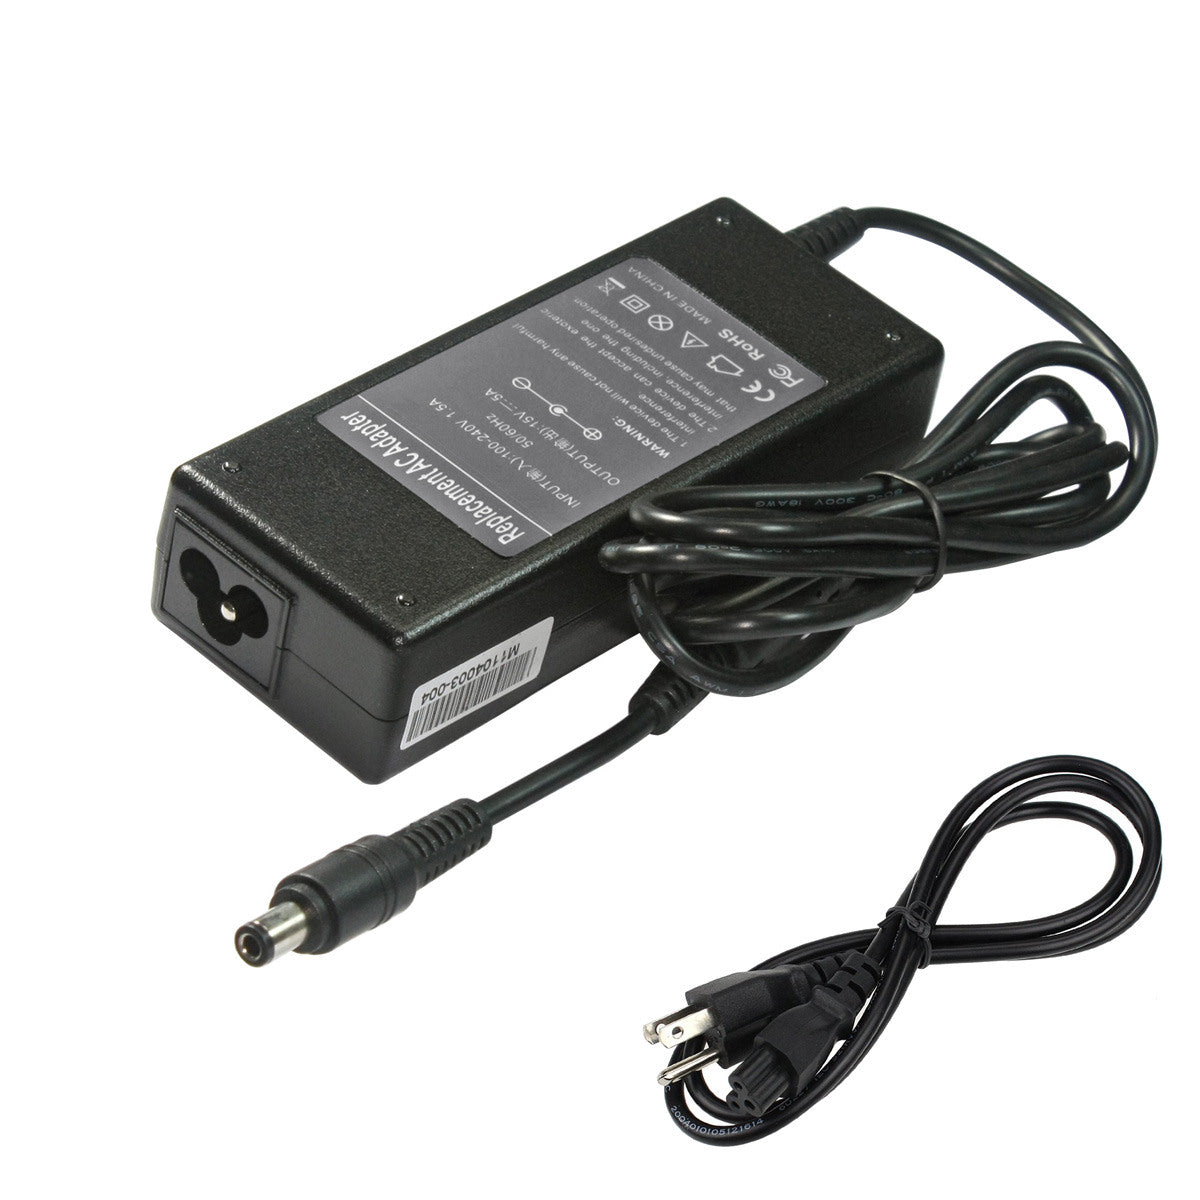 Compatible Replacement Toshiba Satellite PS221U-390J08 Laptop Charger.